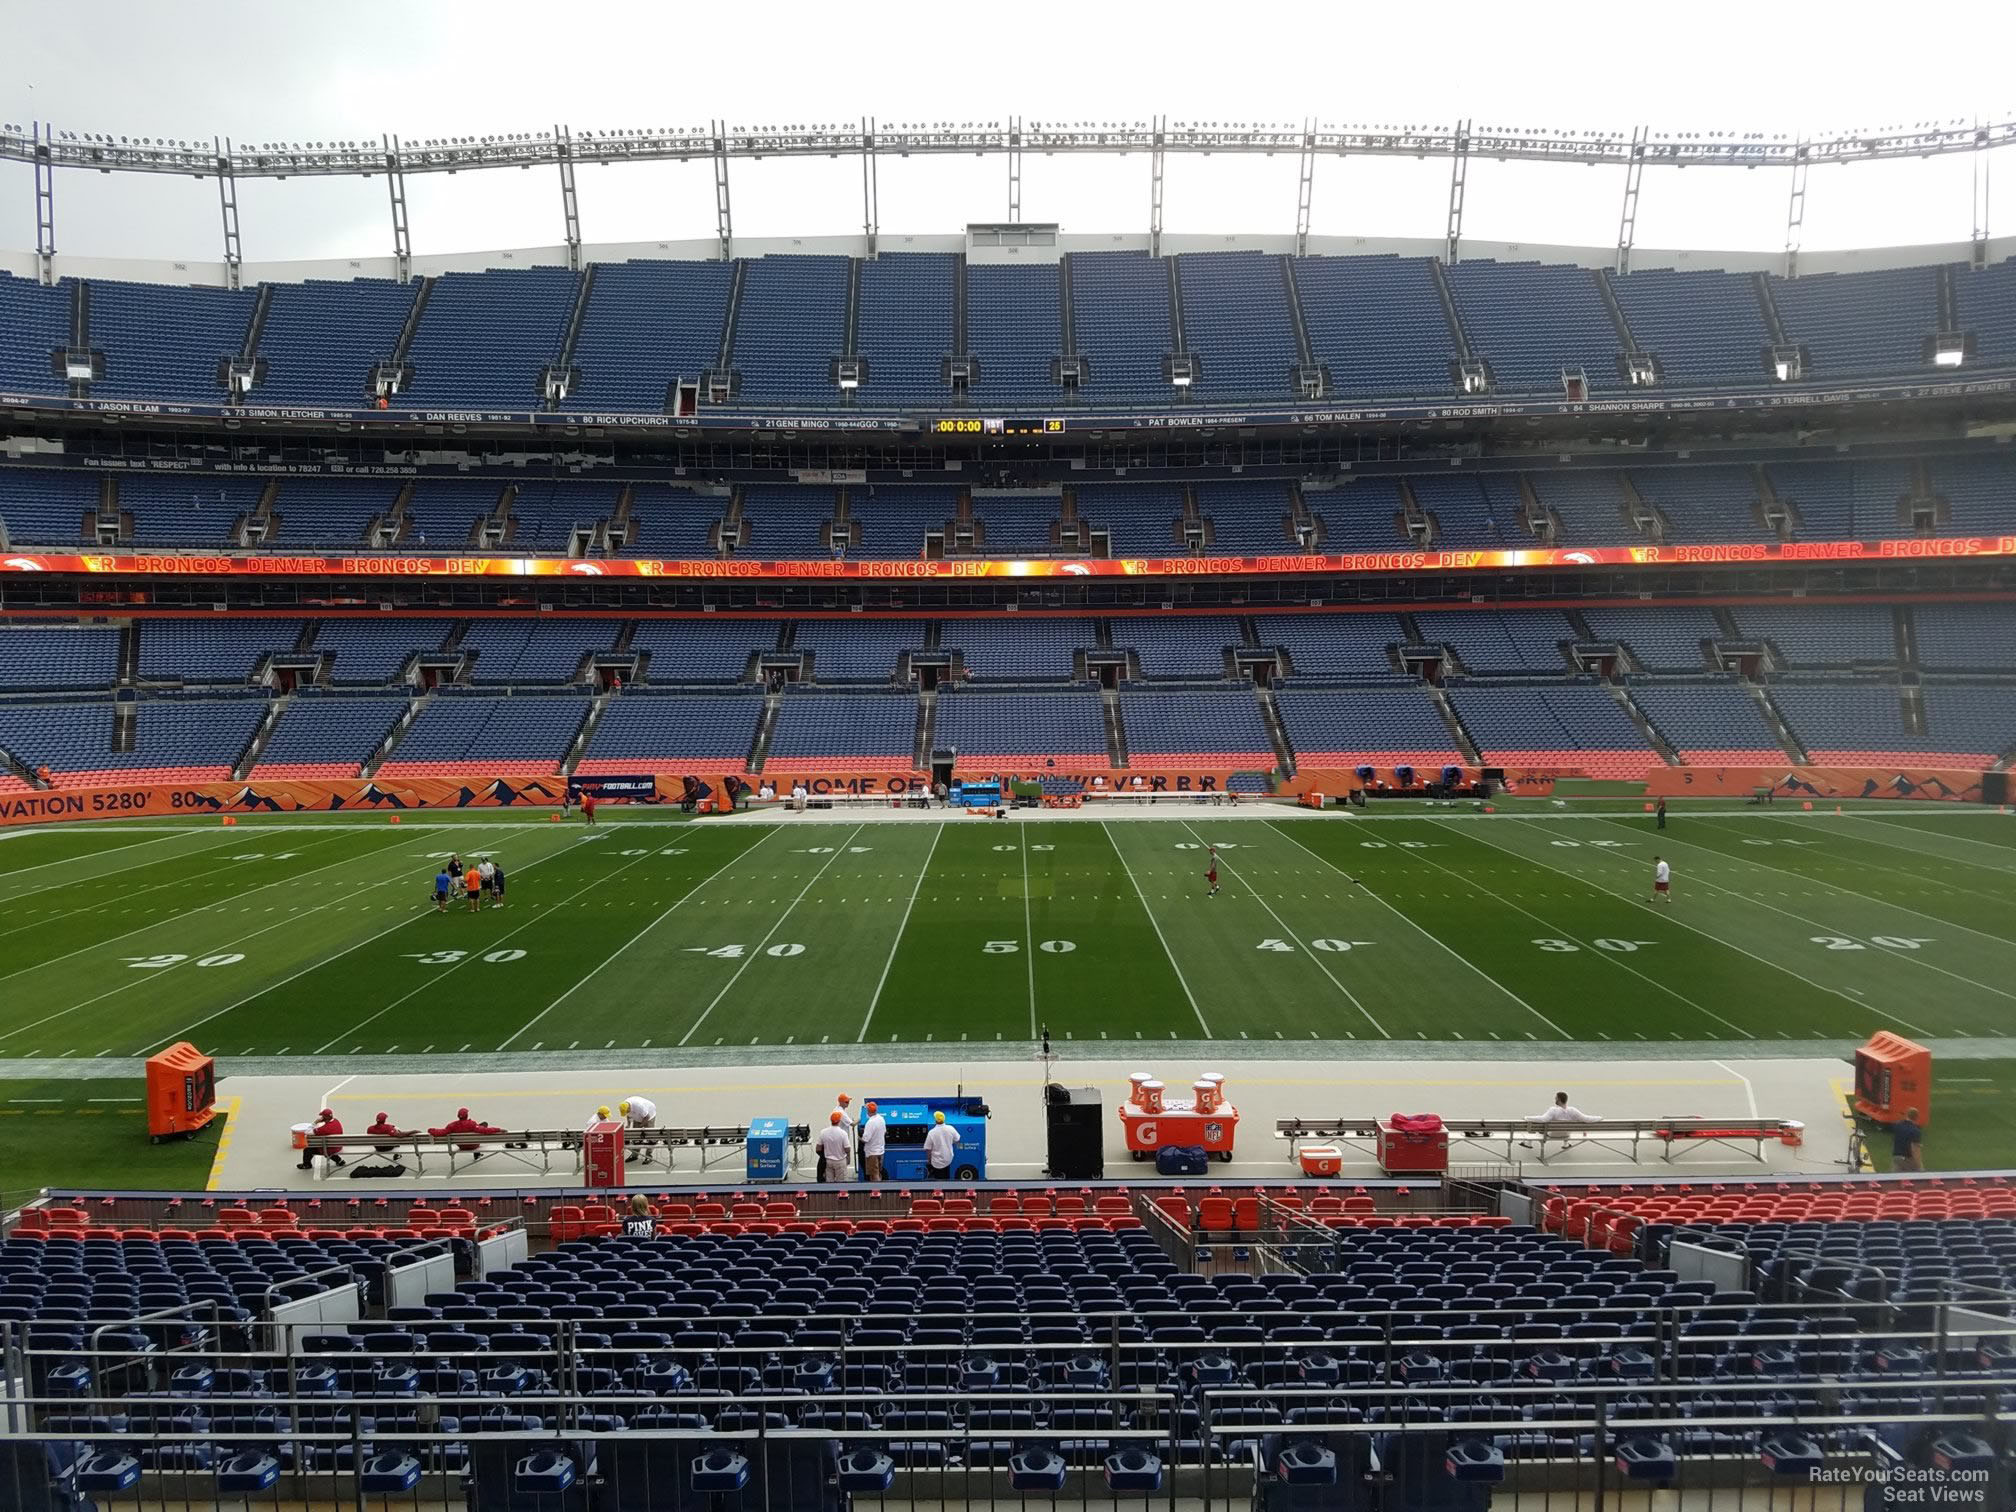 section 123, row 30 seat view  - empower field (at mile high)